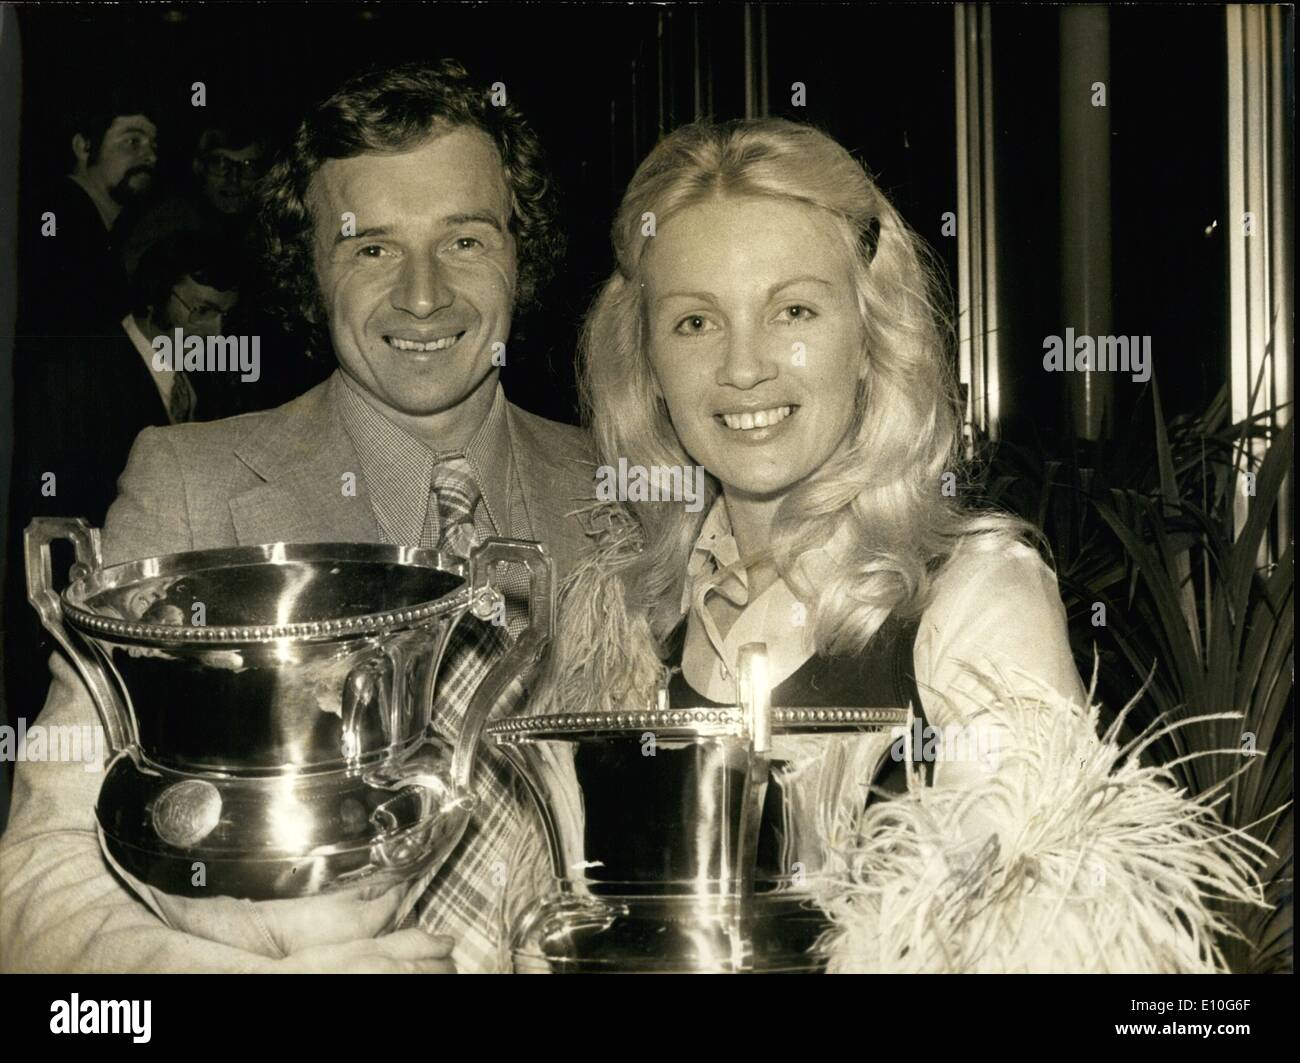 Jan. 01, 1973 - The Formula 1 winner Jean-Pierre Beltoise is seen here with  Marie-Claude Beaumont who came in second. Sign in Germany Forbidding Tanks  on Streets Stock Photo - Alamy